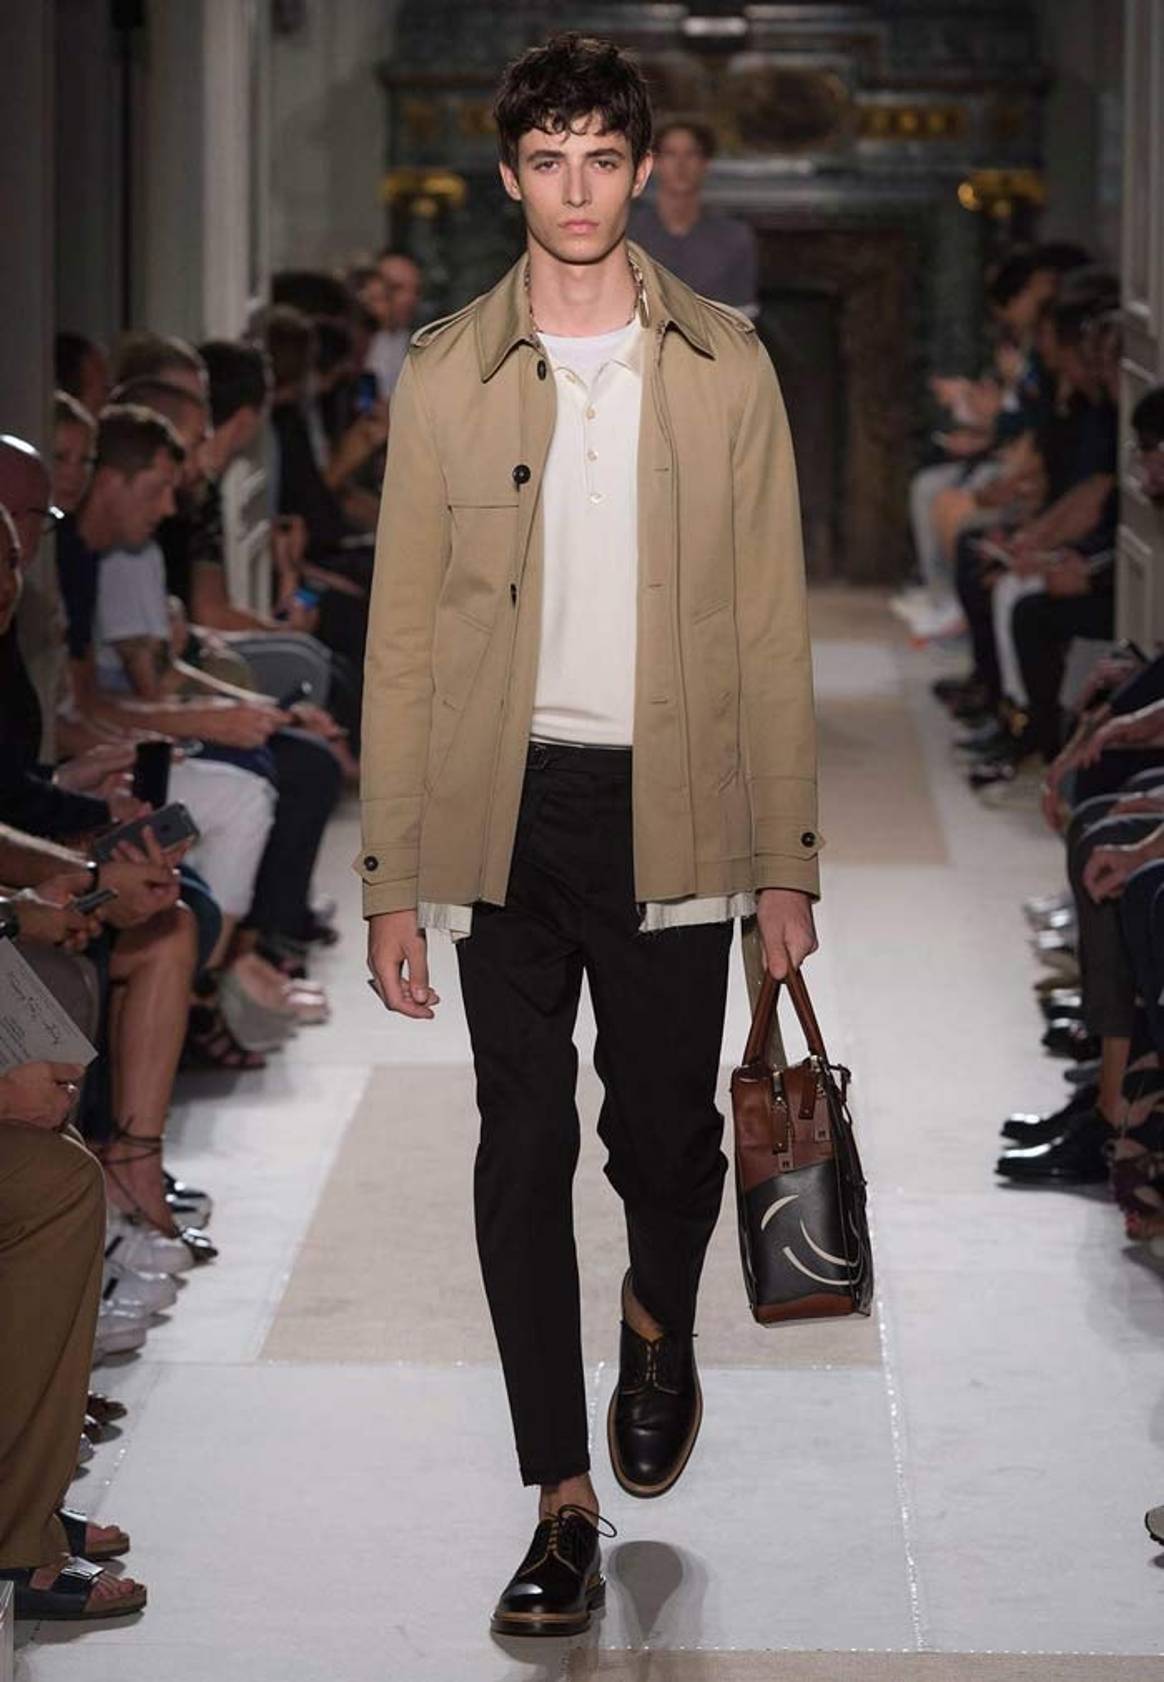 Unfitted garments ruled the runways at Valentino, Balenciaga, and Lemaire